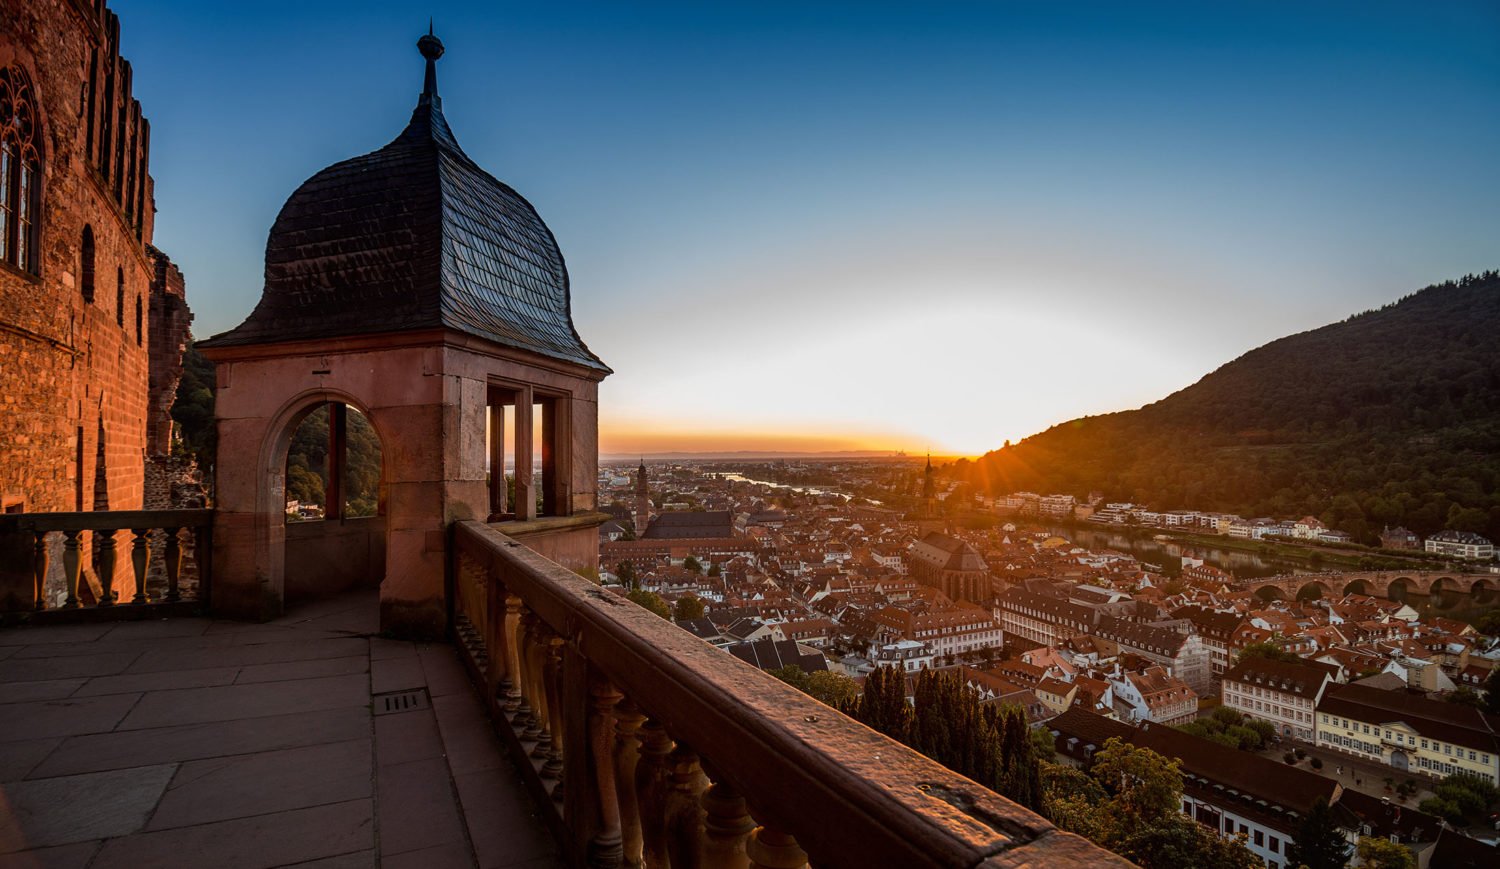 In the evening hours you have a wonderful view over the city from the castle